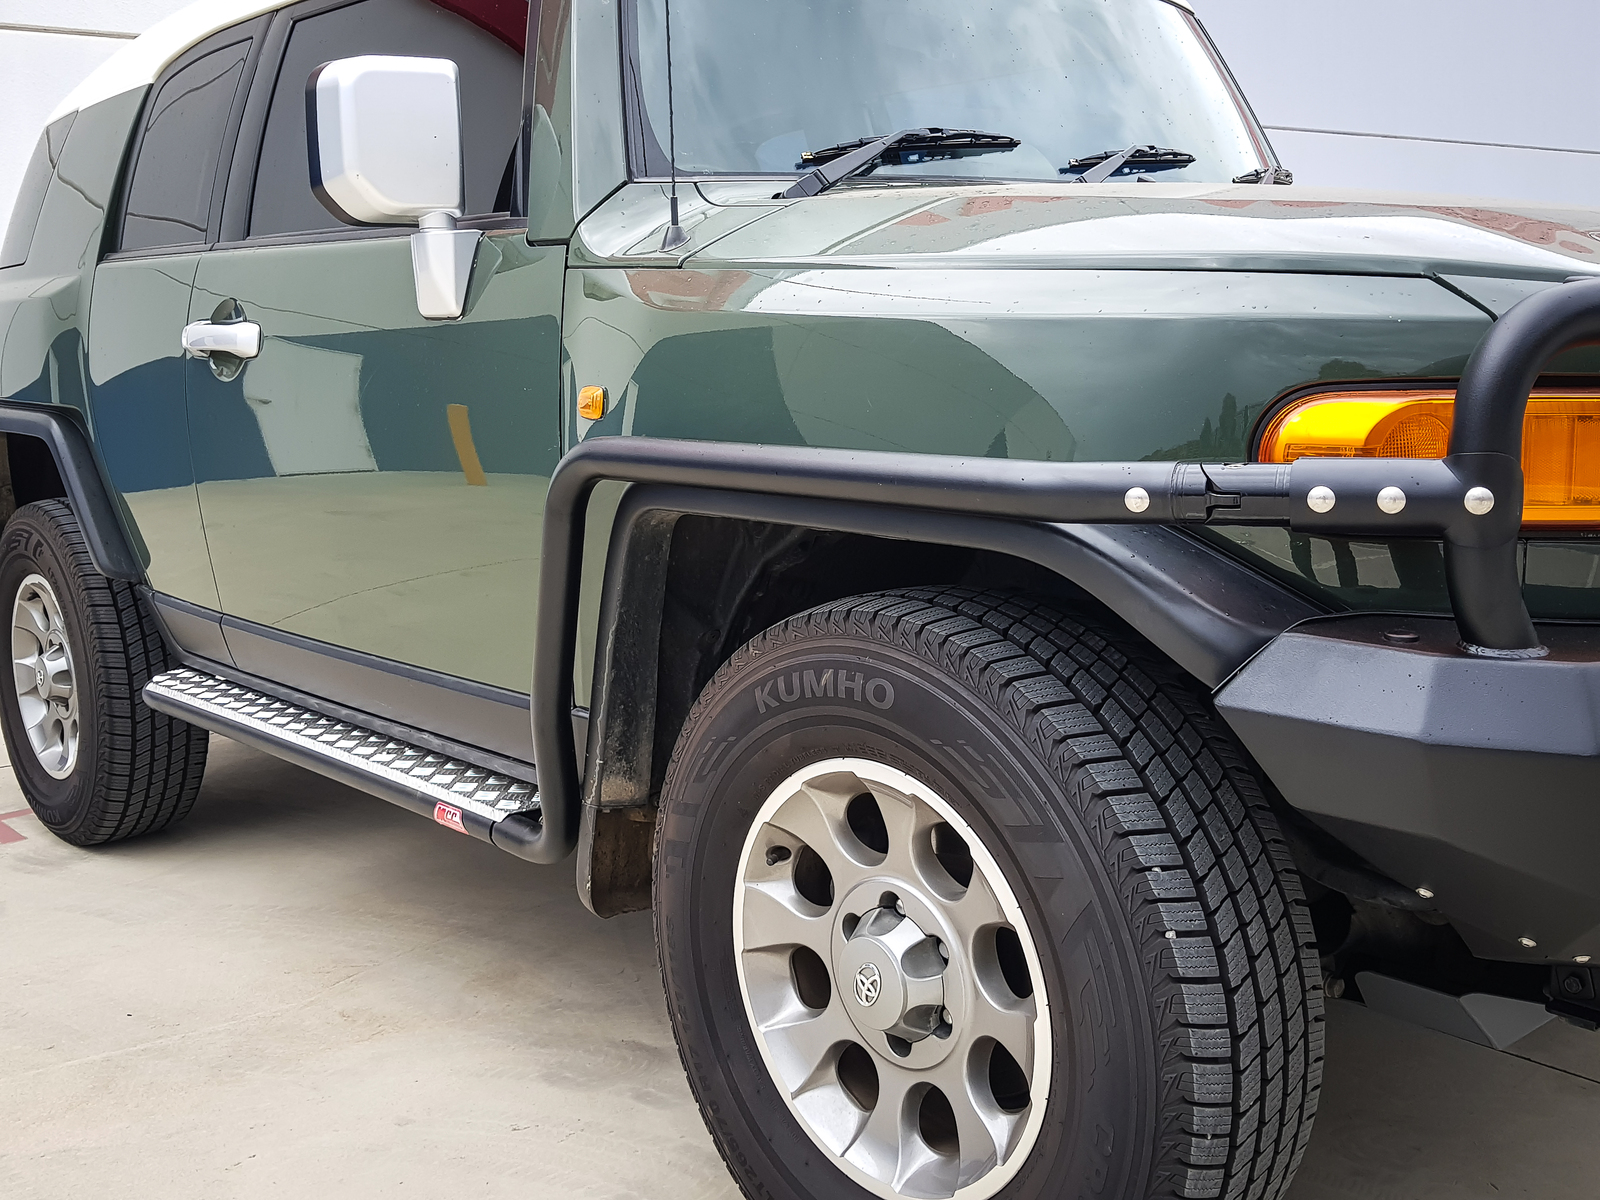 MCC SIDE PROTECTION TO SUIT TOYOTA FJ CRUISER 2011-PRESENT